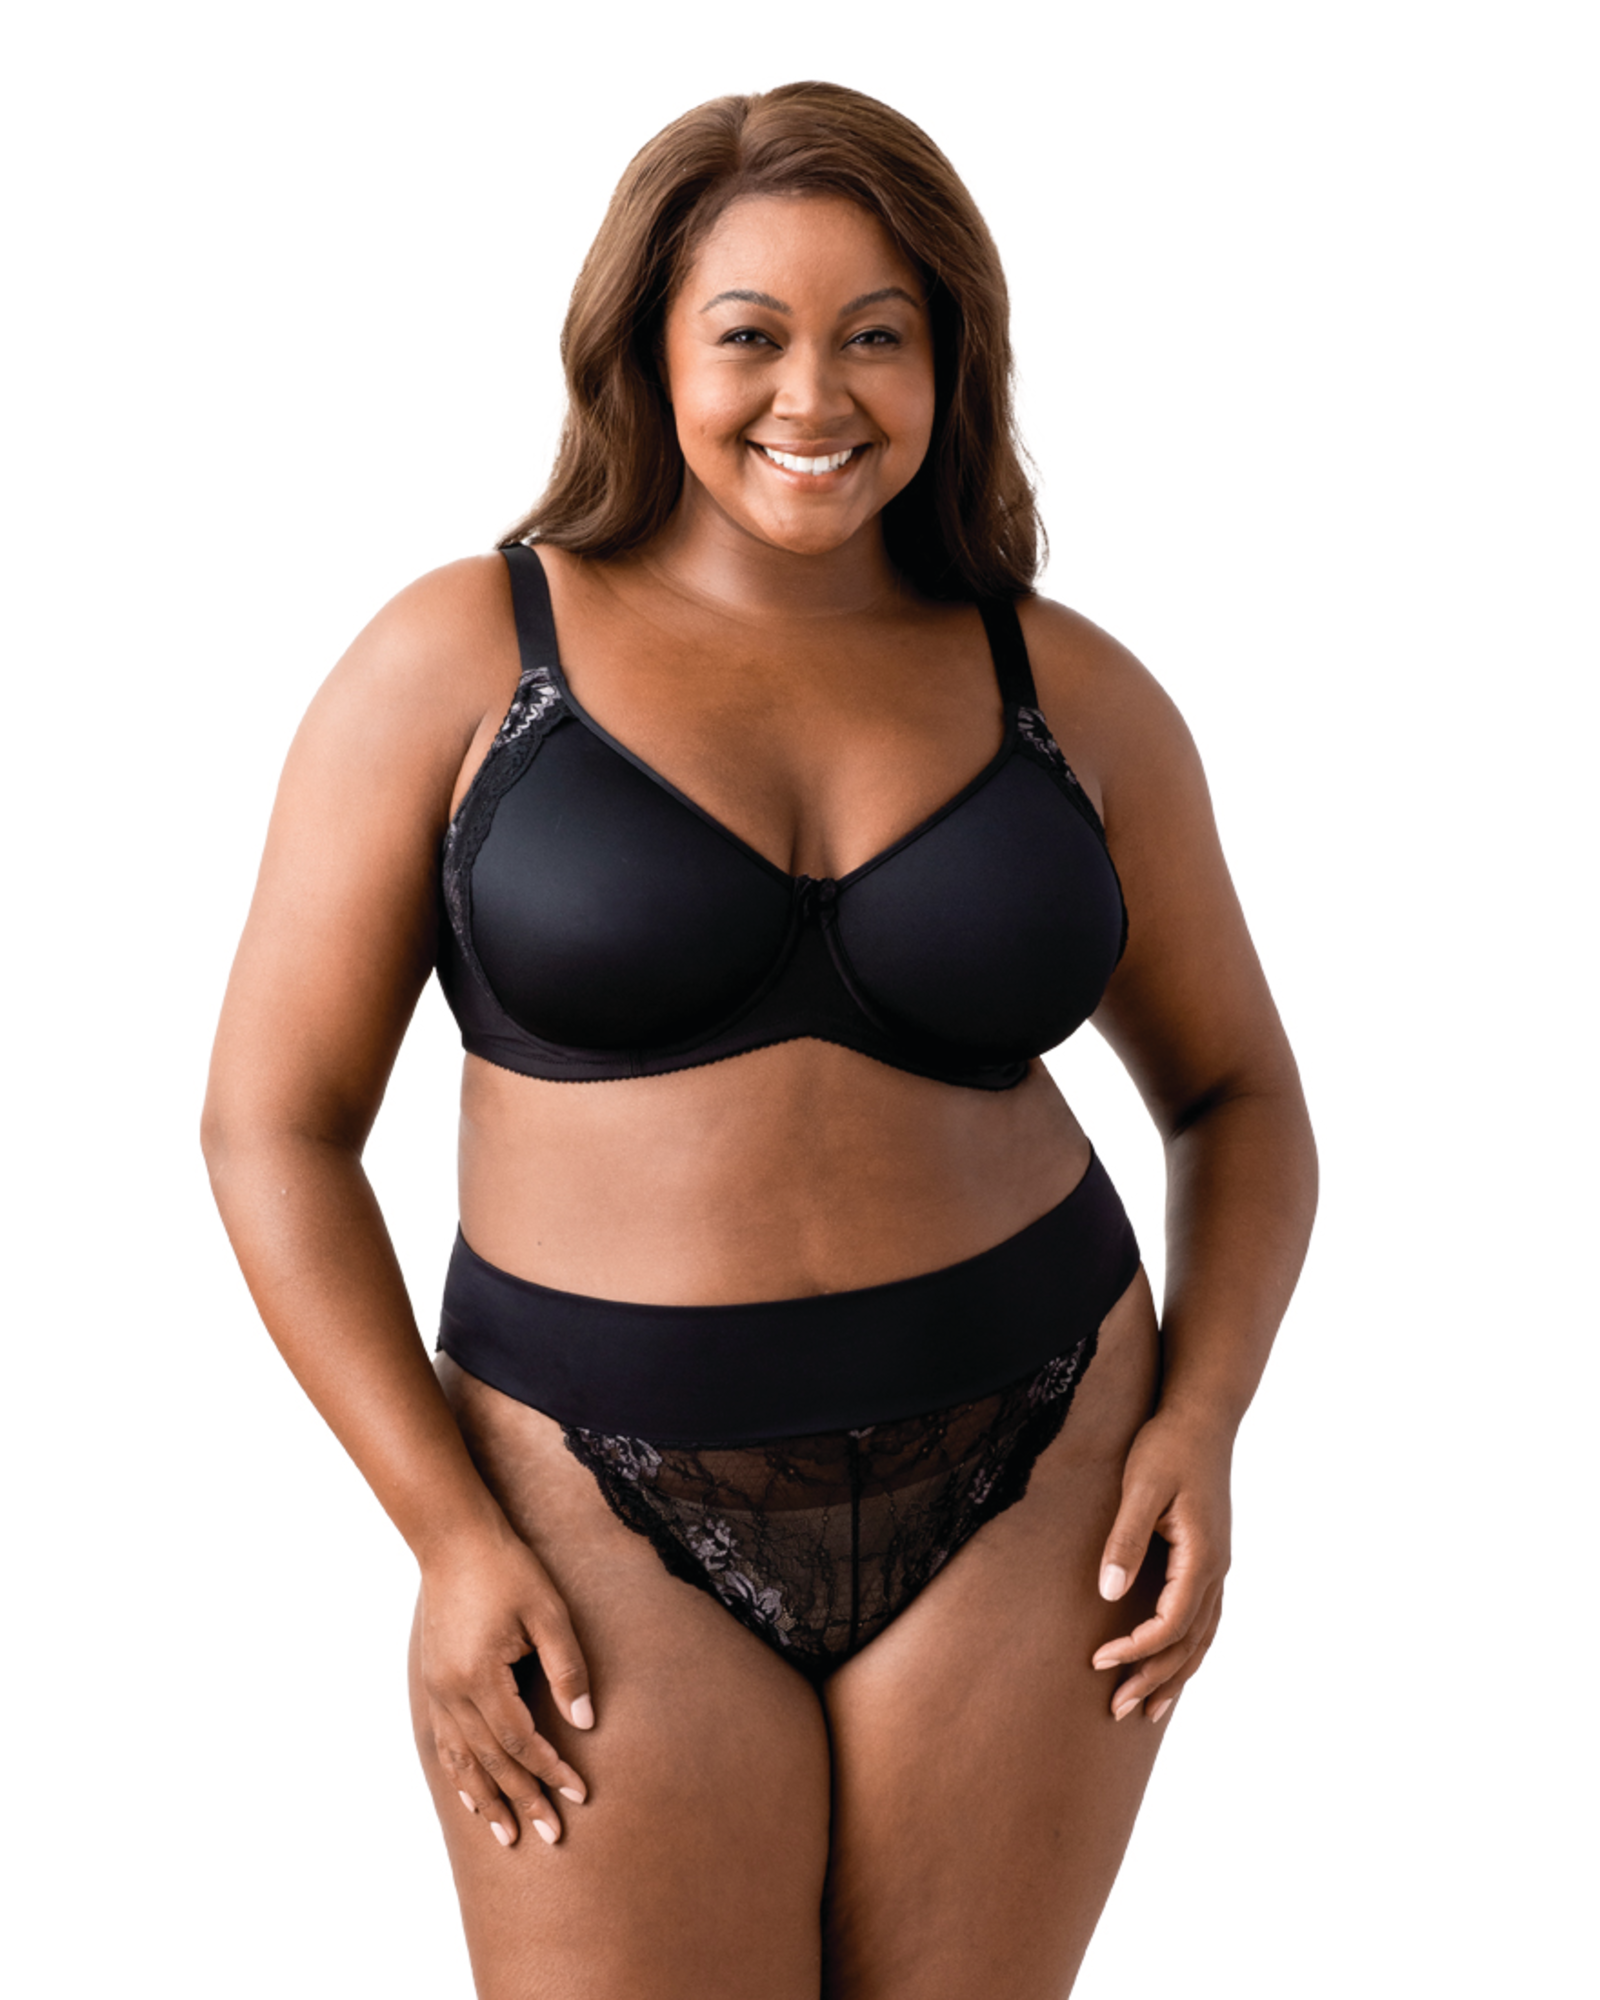 ZYLDDP Women's Bra Full Coverage Floral Lace Plus Size Underwired Bra， A  Daily Bra for All Seasons (Color : Black, Size : 34H)